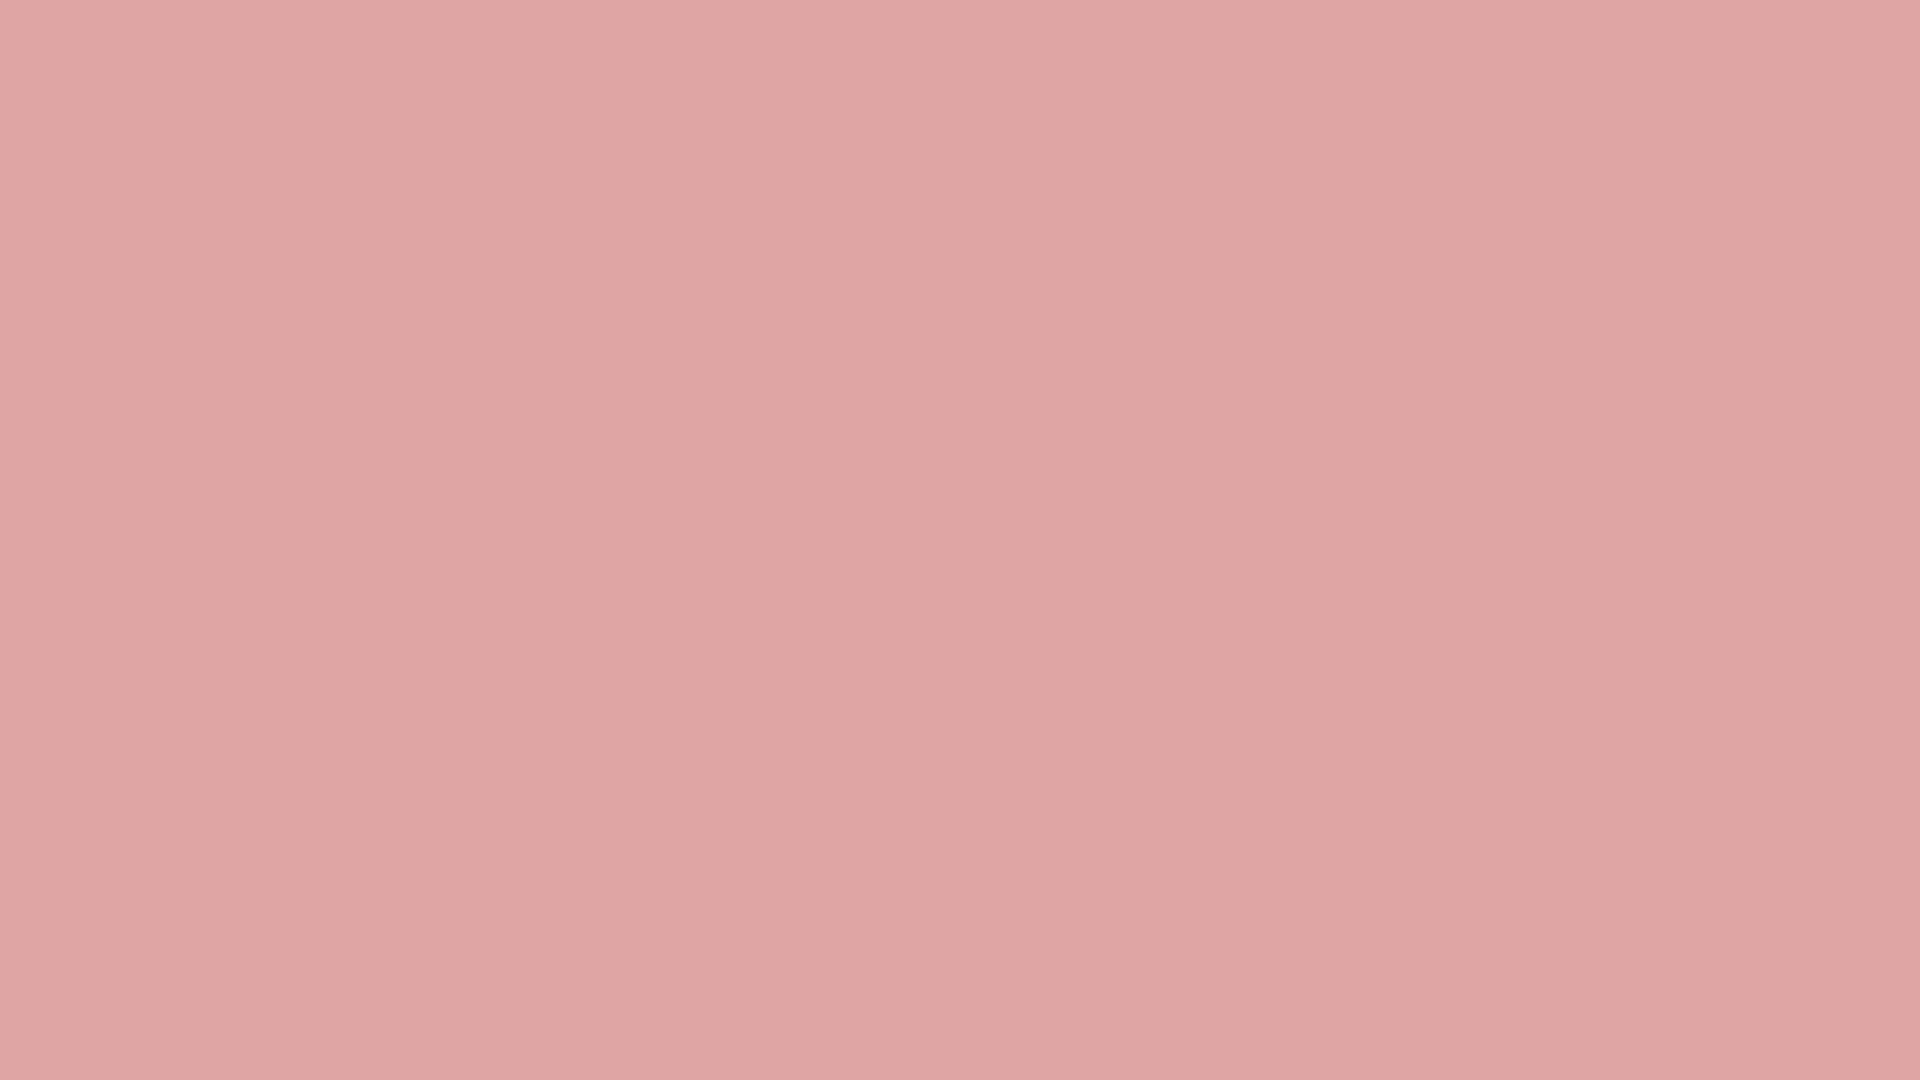 1920x1080 Pastel Pink Solid Color Background